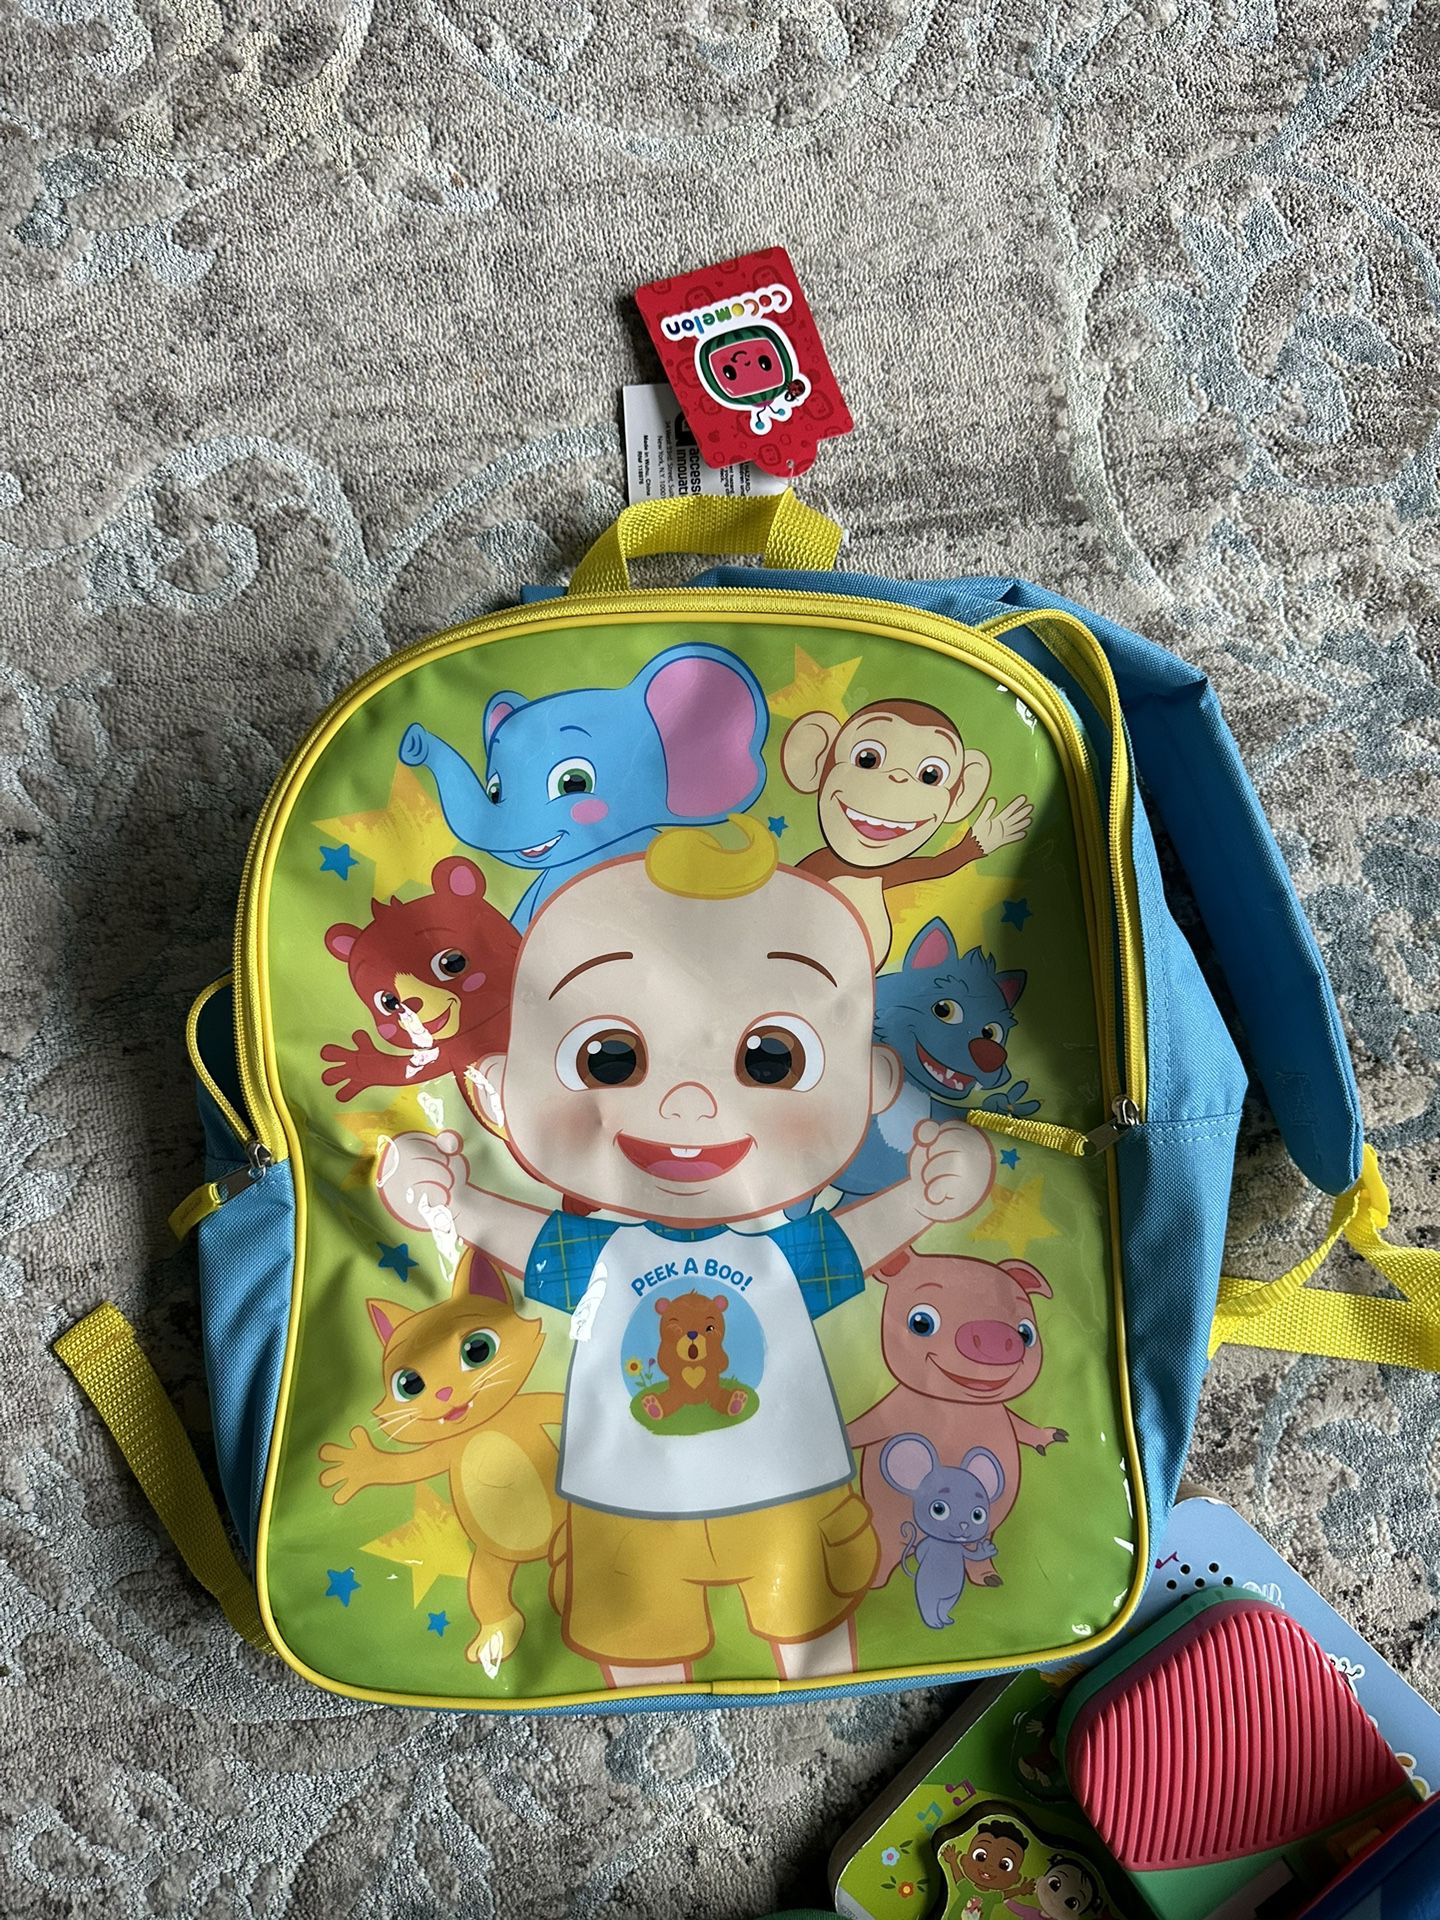 Cocomelon Backpack And Toys